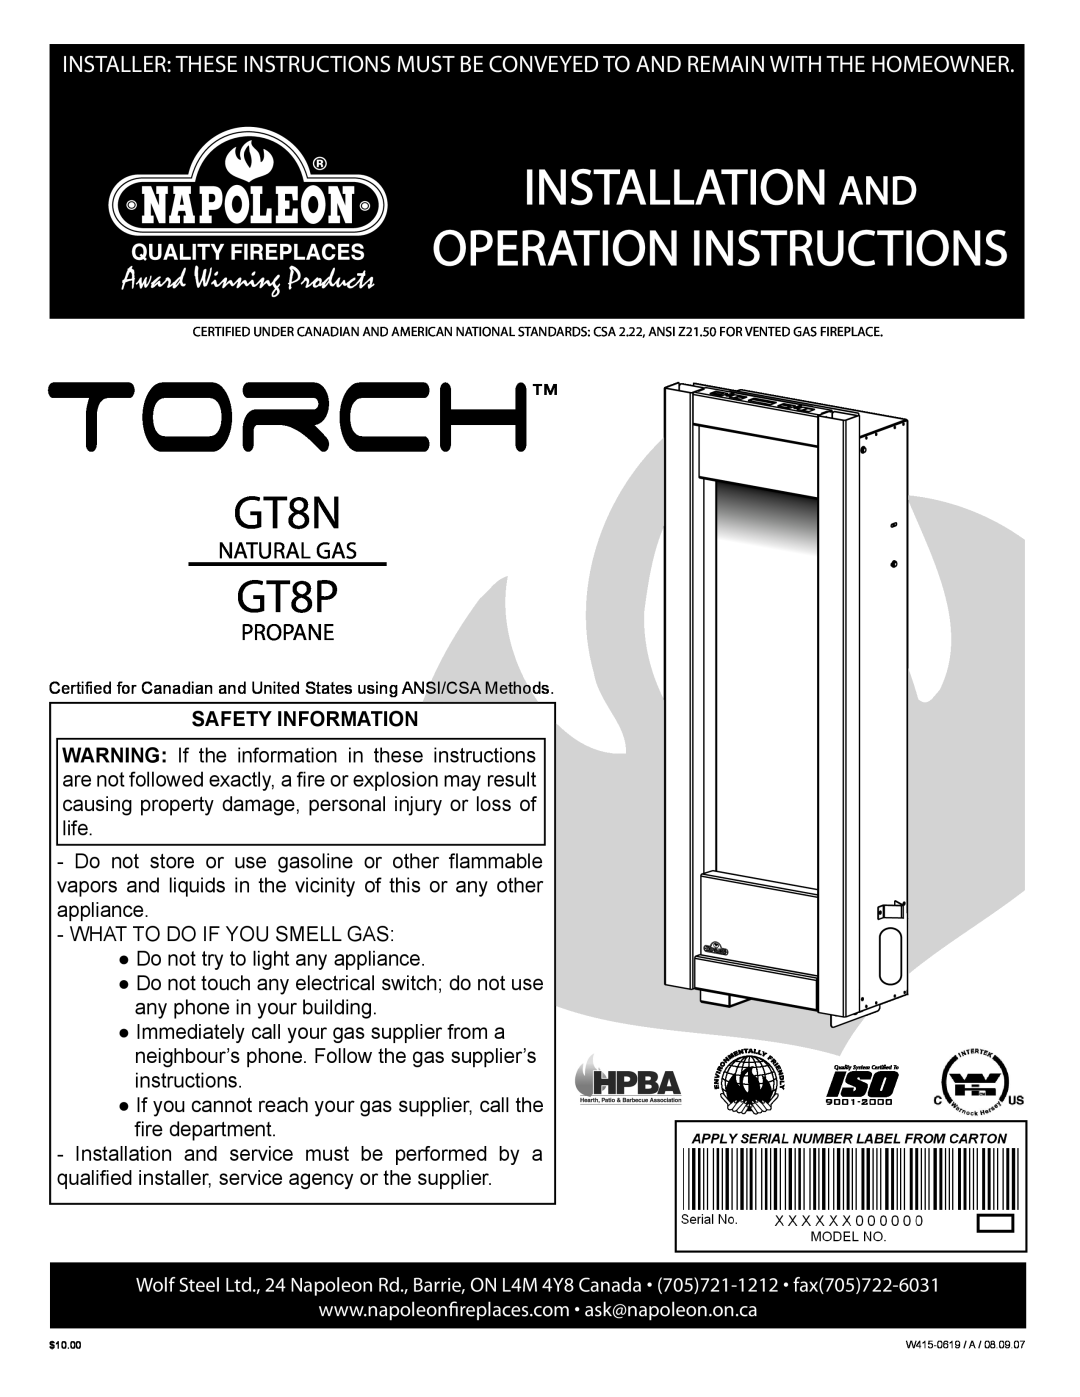 Napoleon Fireplaces GT8P manual Installation And Operation Instructions, GT8N, Natural Gas, Propane, Safety Information 